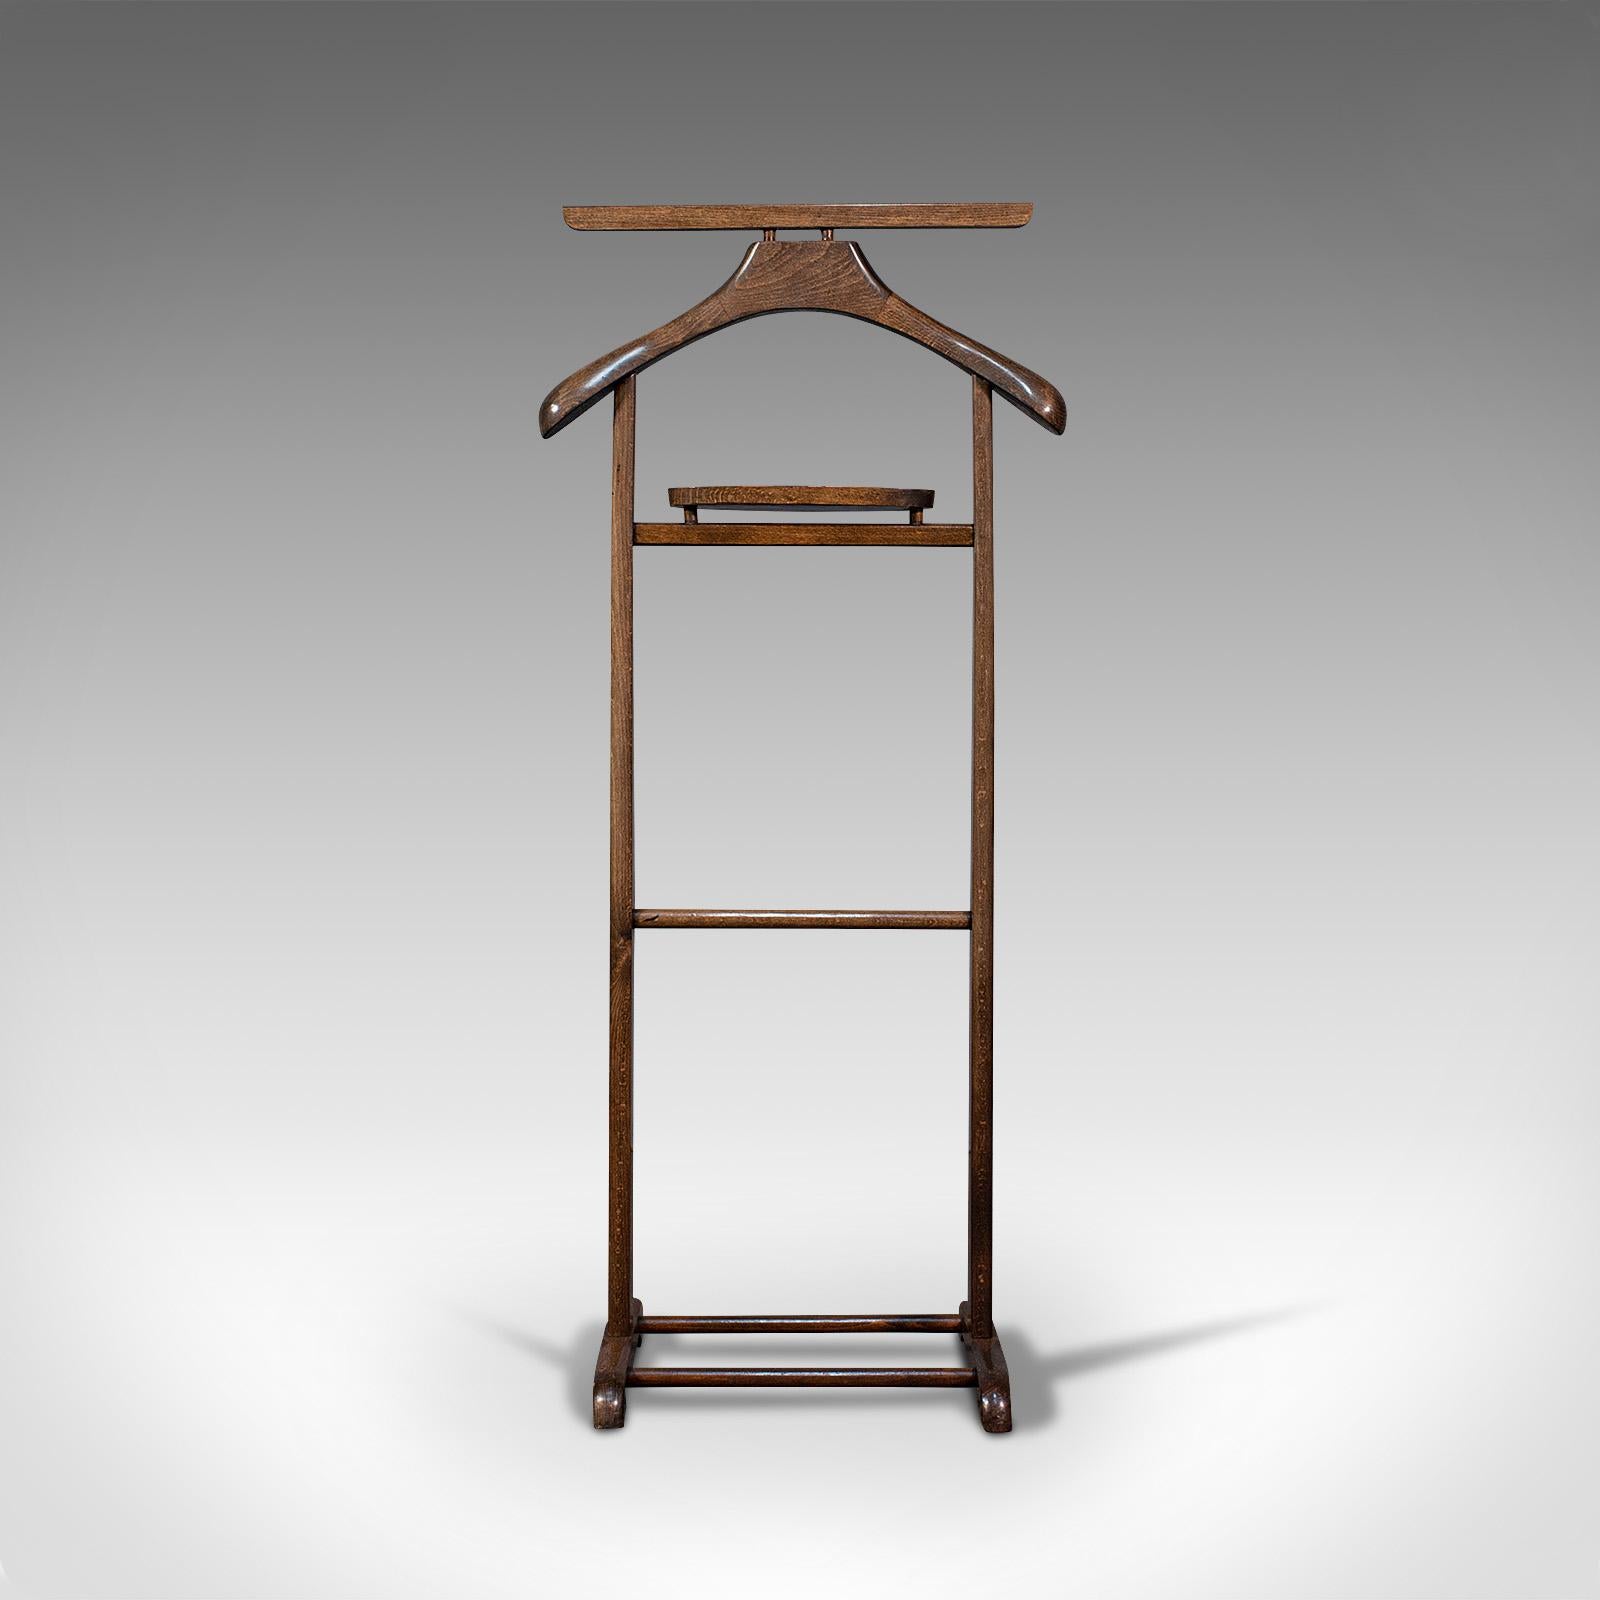 This is an antique gentleman's valet. An English, beech bedroom rack or nightstand, dating to the Edwardian period, circa 1910.

Elegant practicality for the master bedroom
Displaying a desirable aged patina
Select beech awash with fine grain